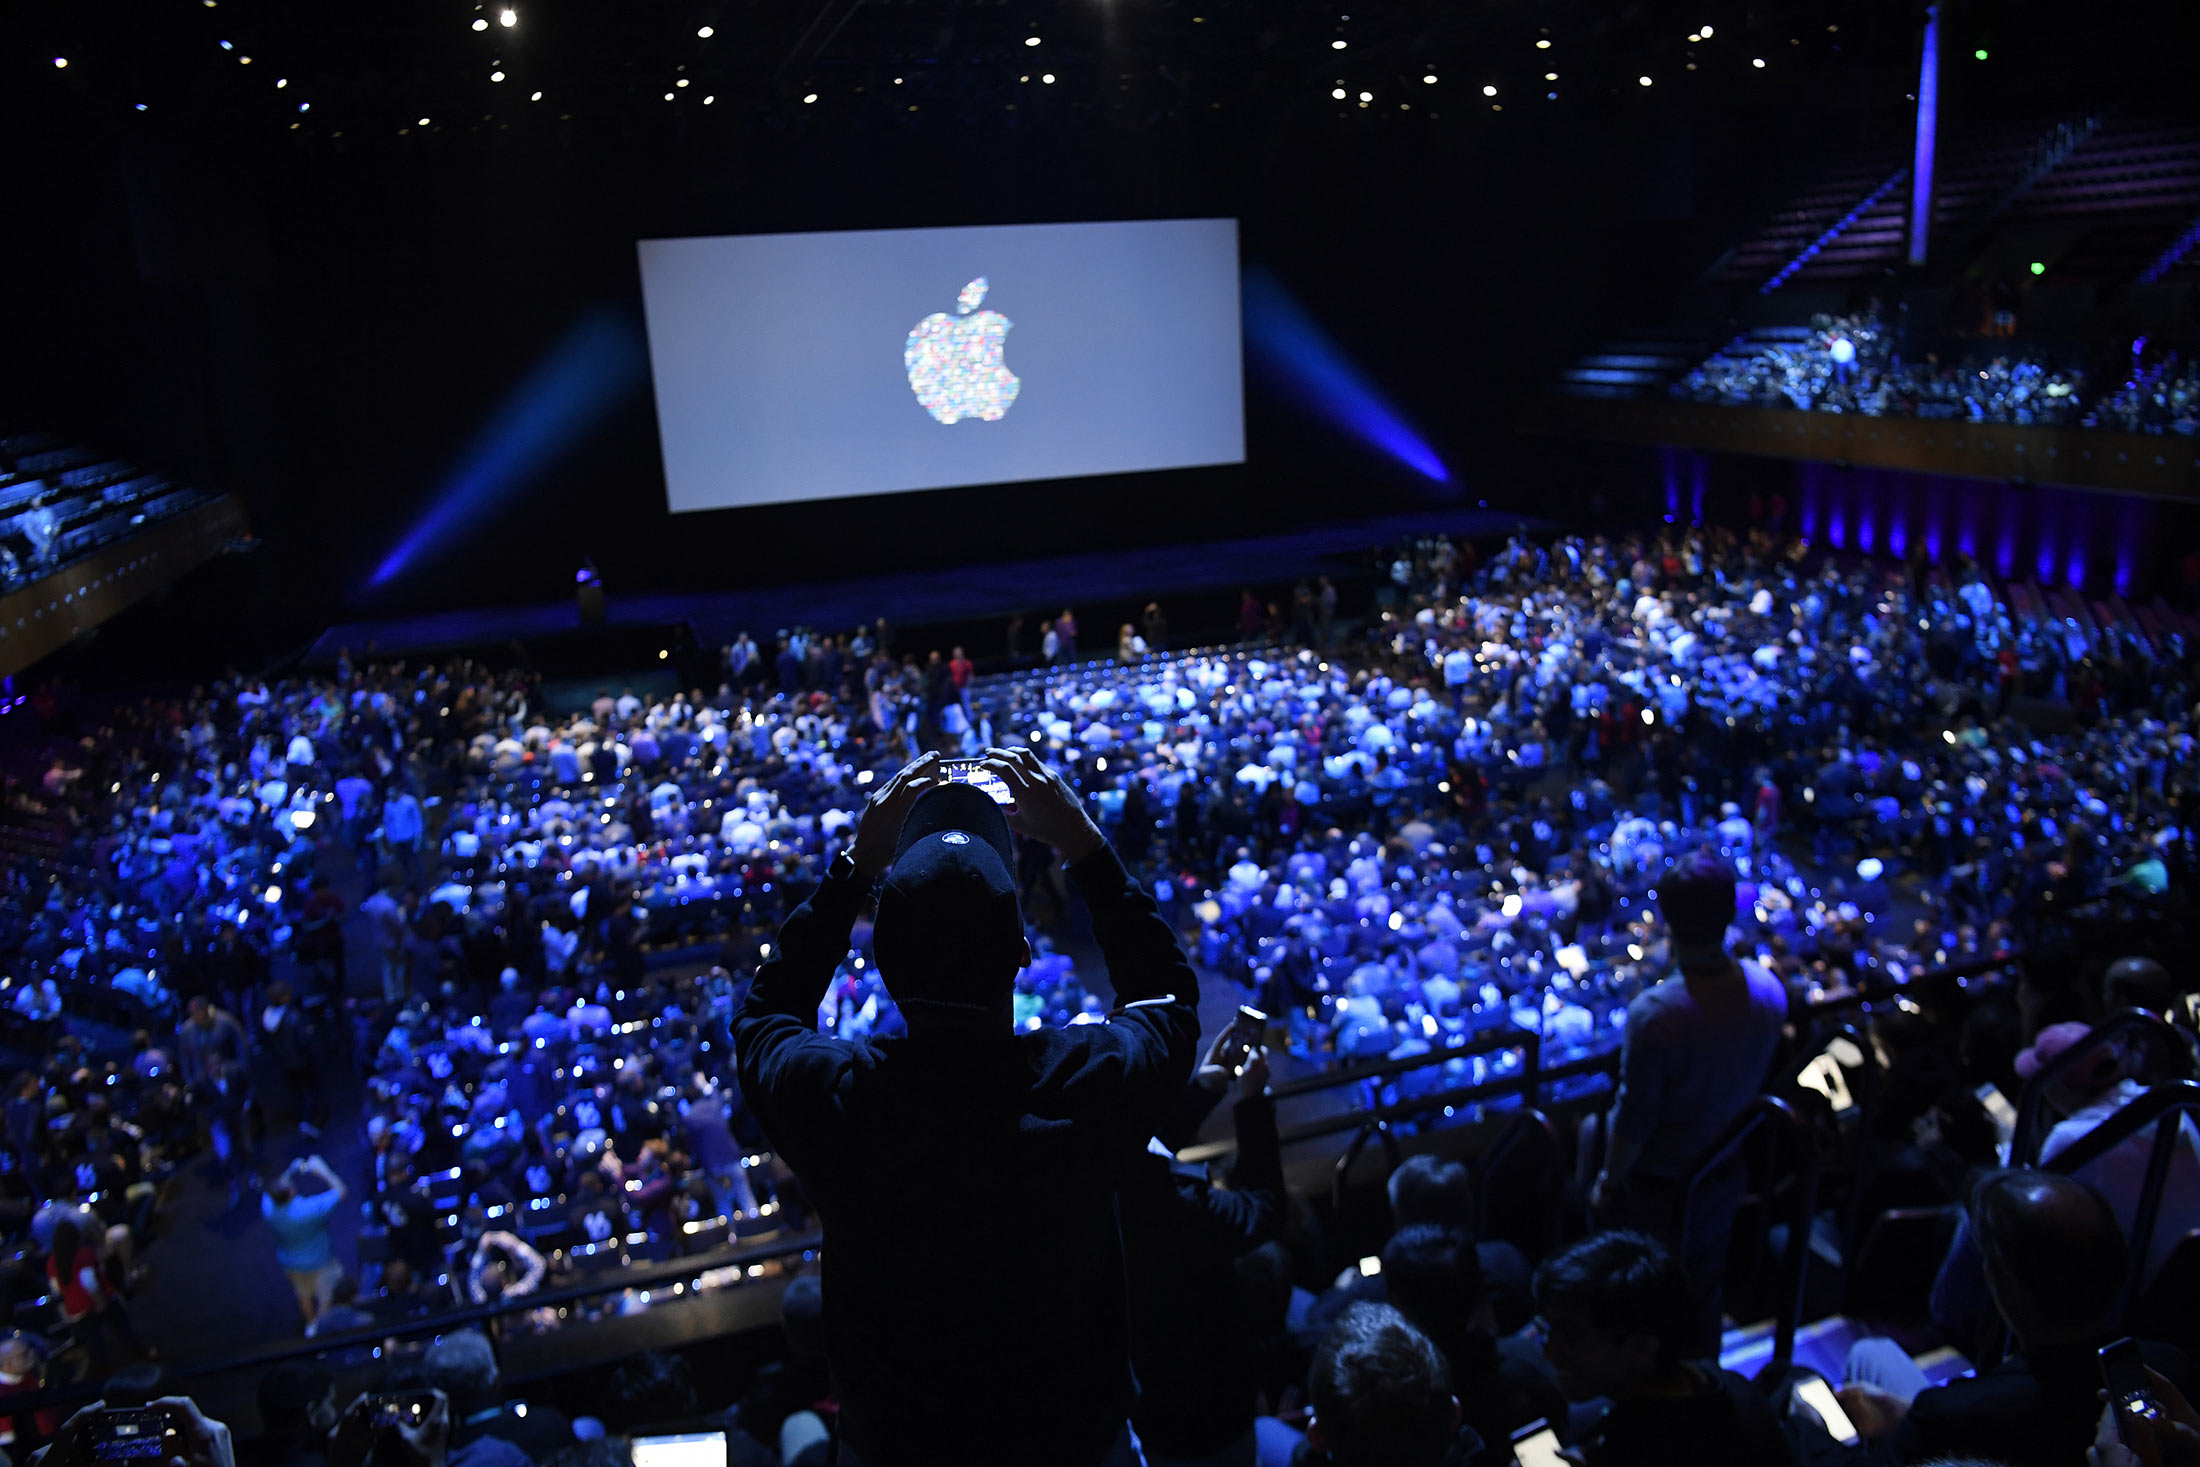 Apple Makes WWDC Conference Online Only Amid Virus Pandemic Bloomberg